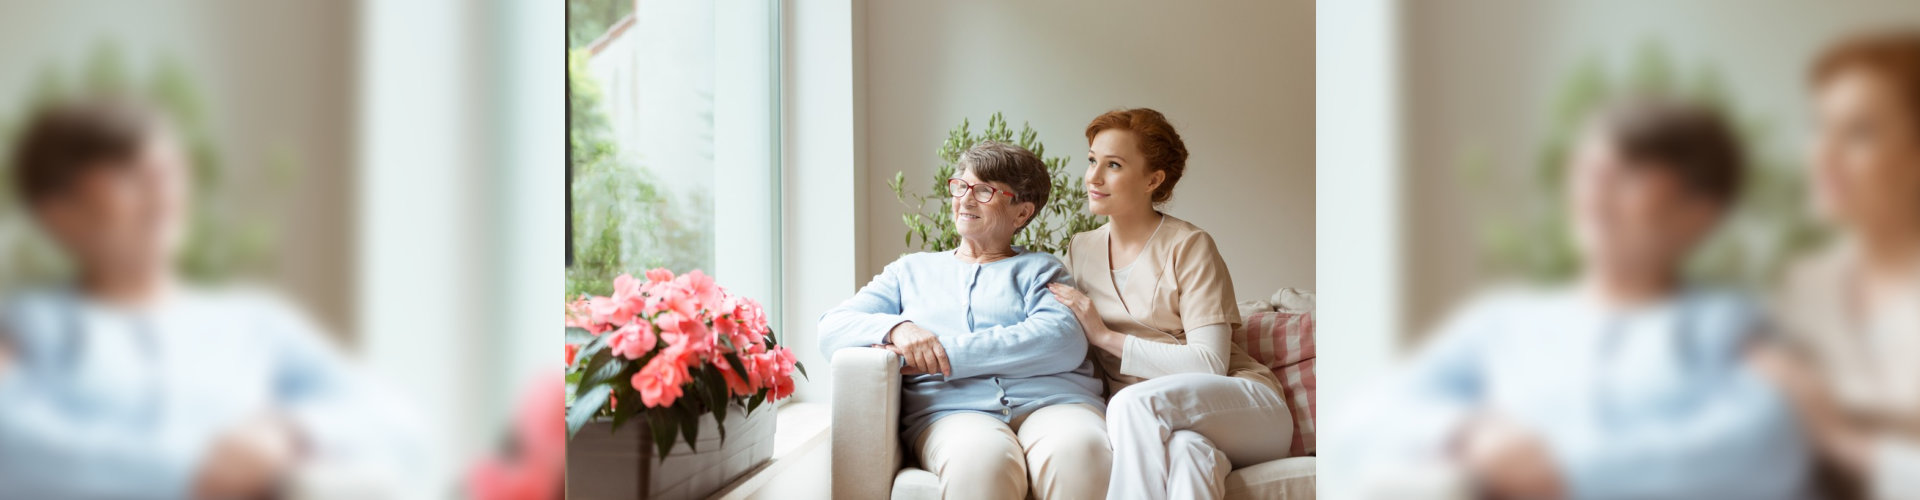 senior and caregiver sitting on couch looking outside